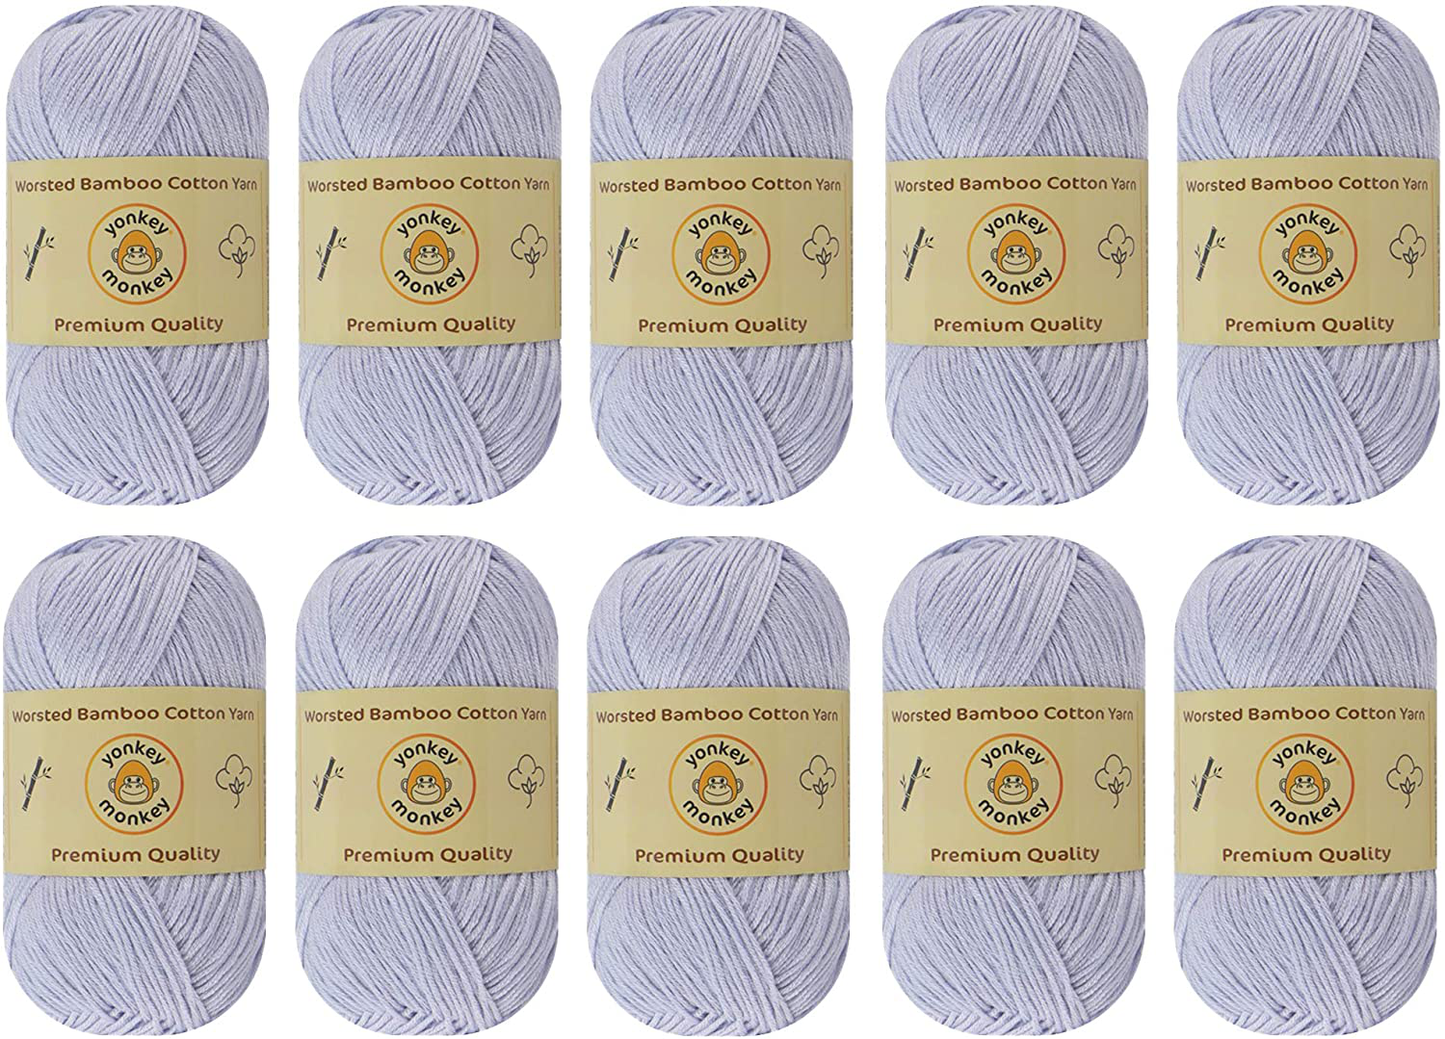 10-Pack Yonkey Monkey Skein Tencel Yarn - 70% Bamboo, 30% Cotton - Softest Quality Crocheting, Knitting Supplies - Lightweight and Breathable Fabric Threads 210 Meters